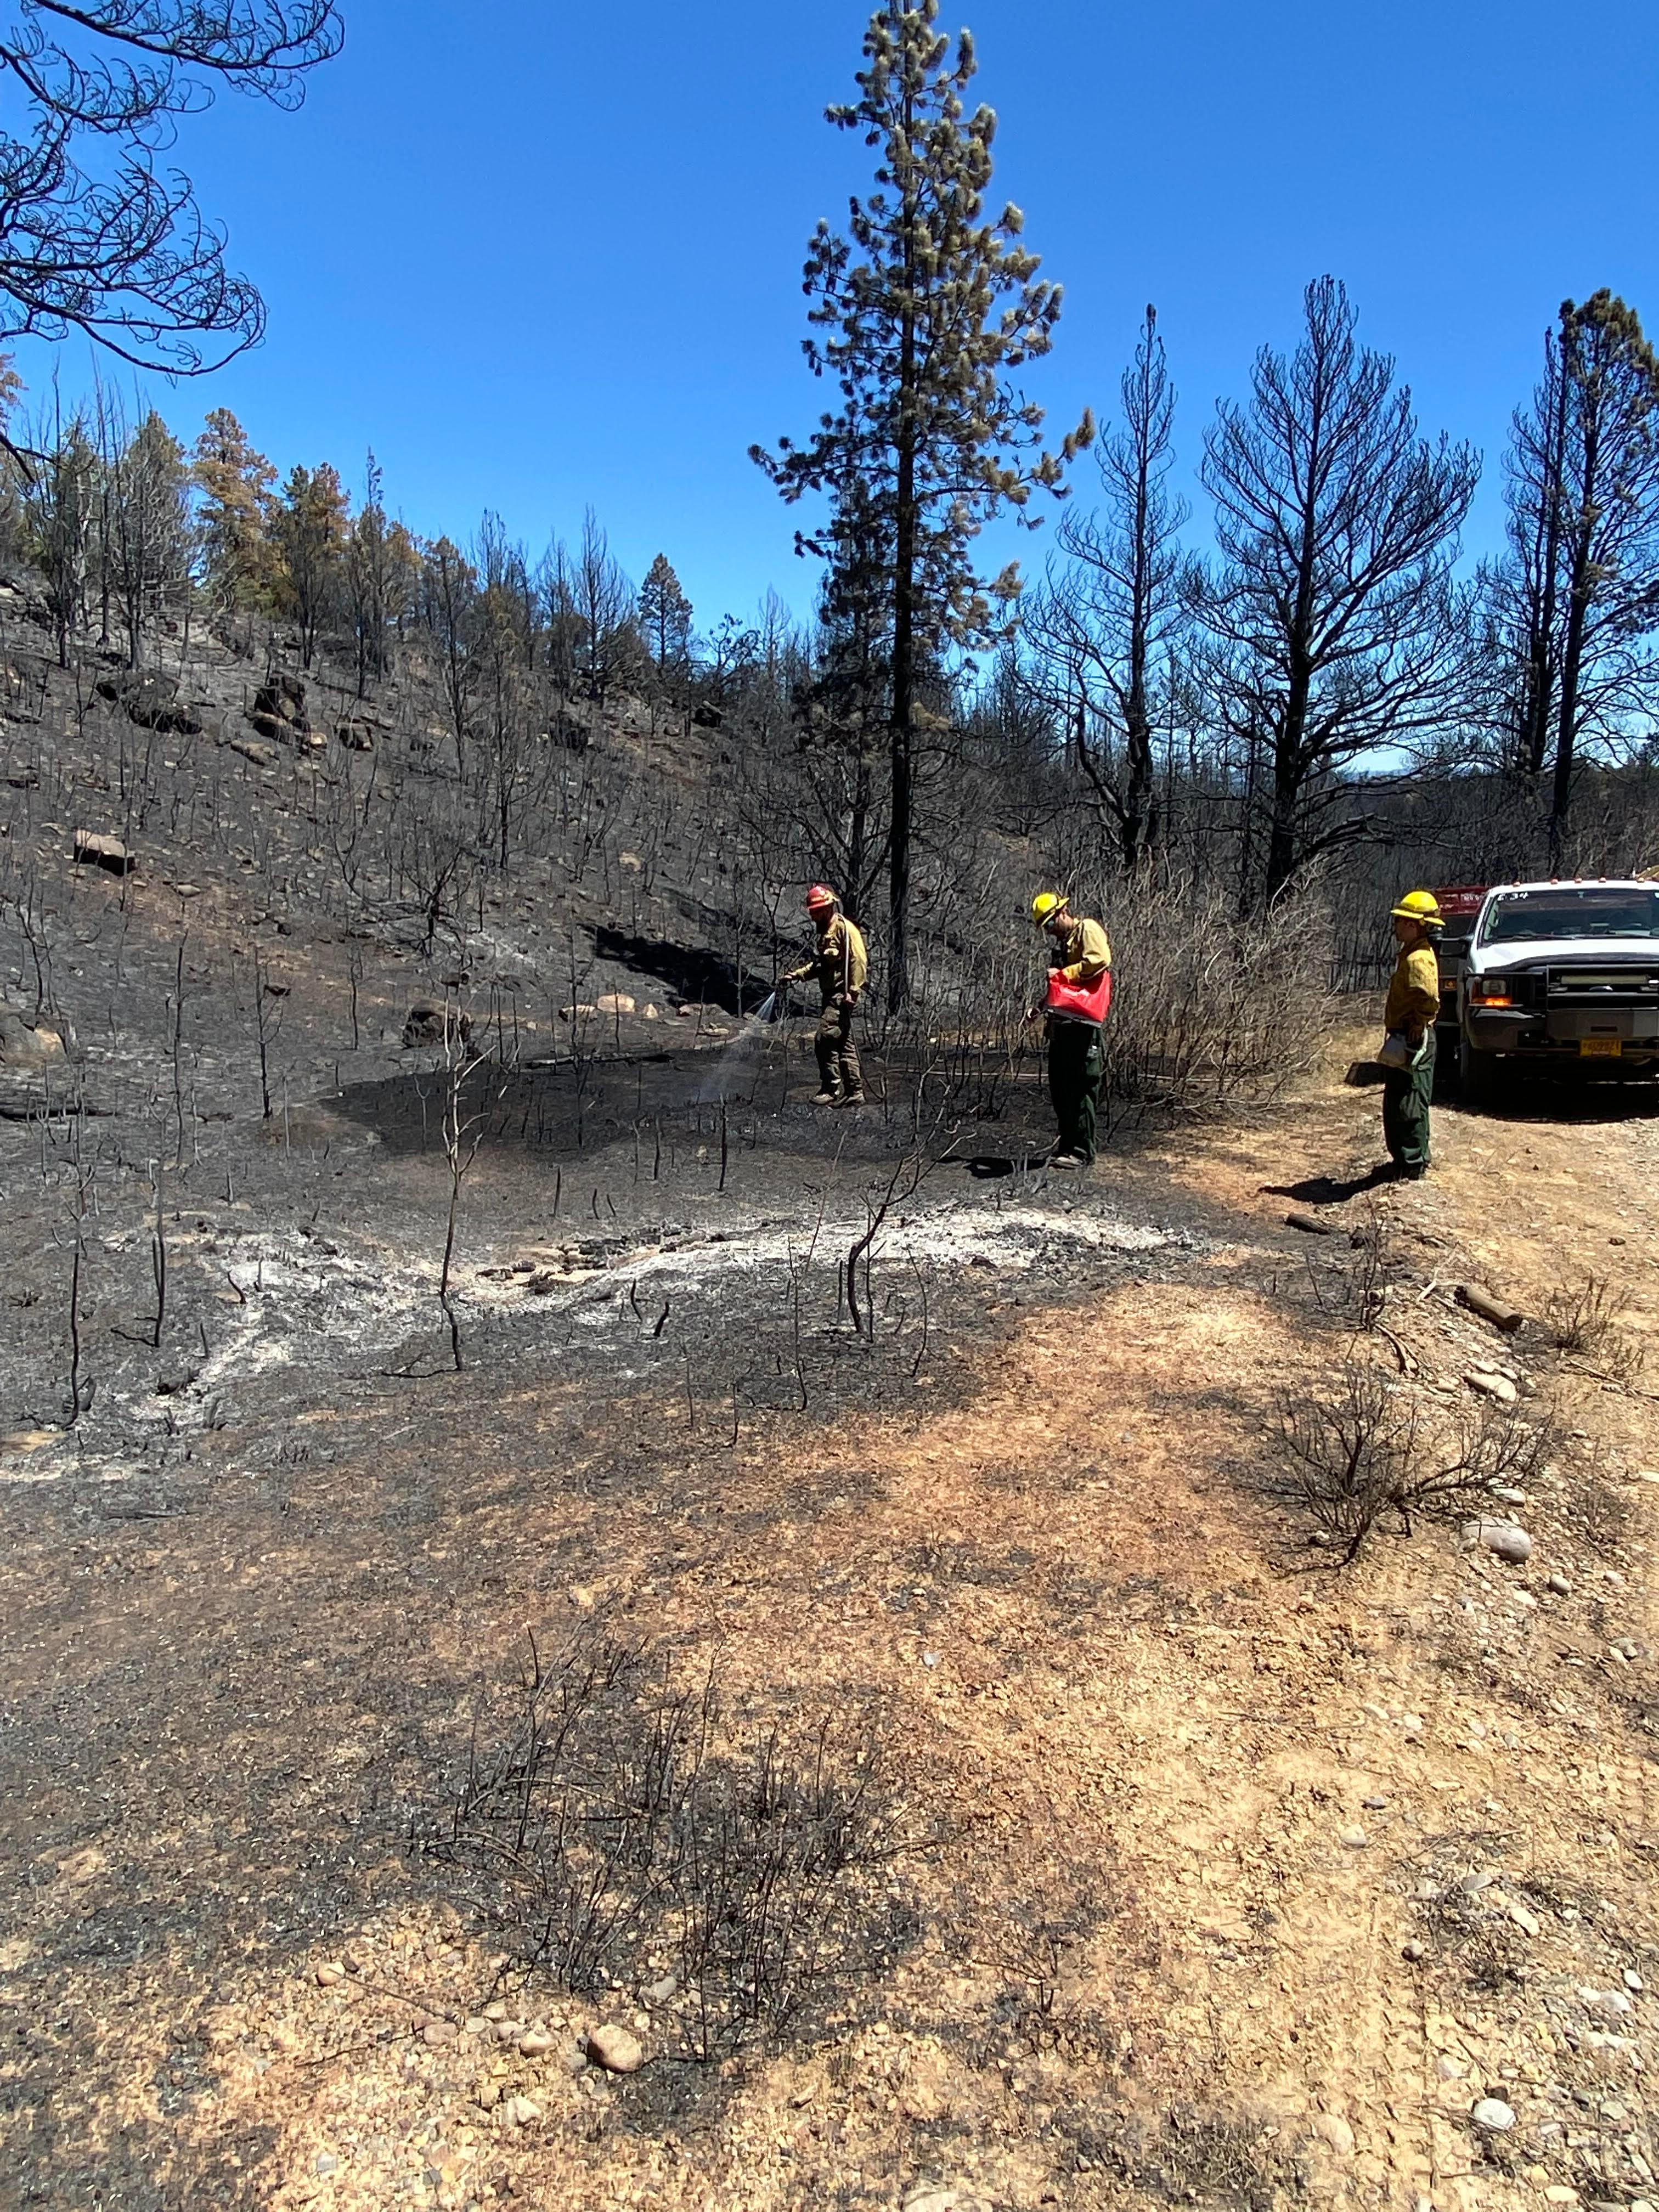 Fire Crews spread native seed and water burn area